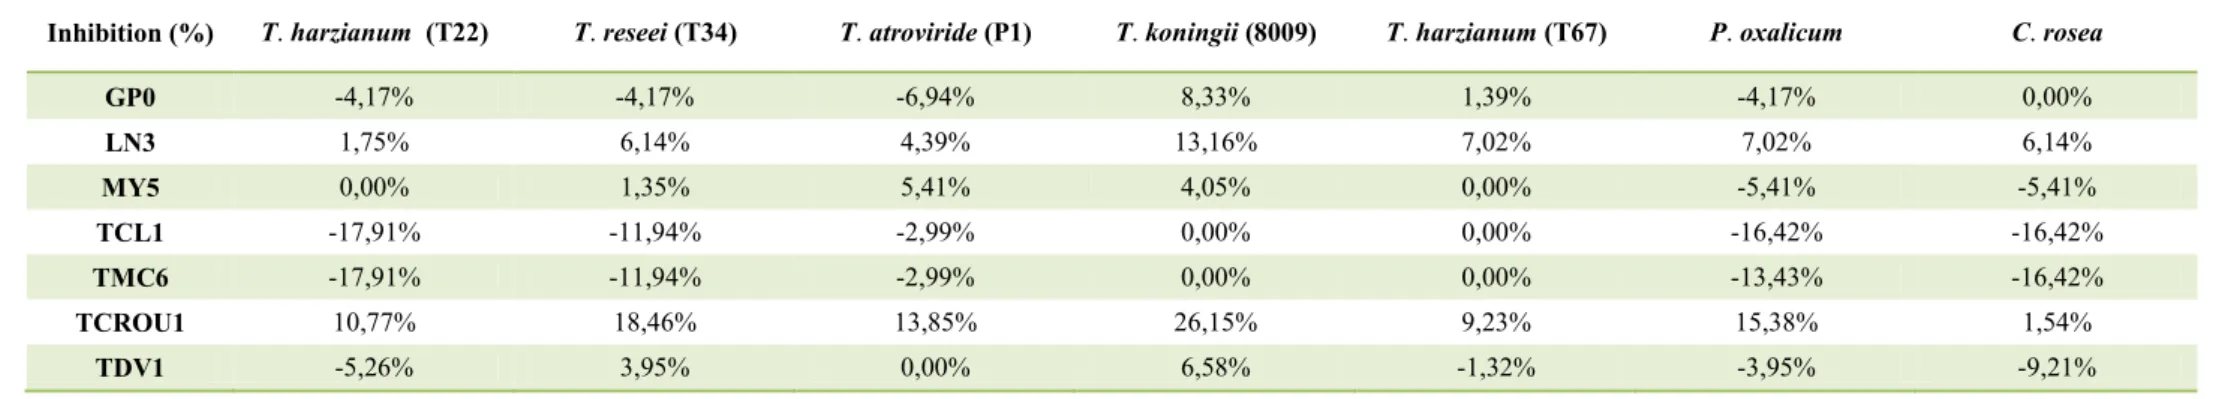 Table 3 - Effects of non-volatile metabolites produced by several Trichoderma spp. on radial growth of different Calonectria spp